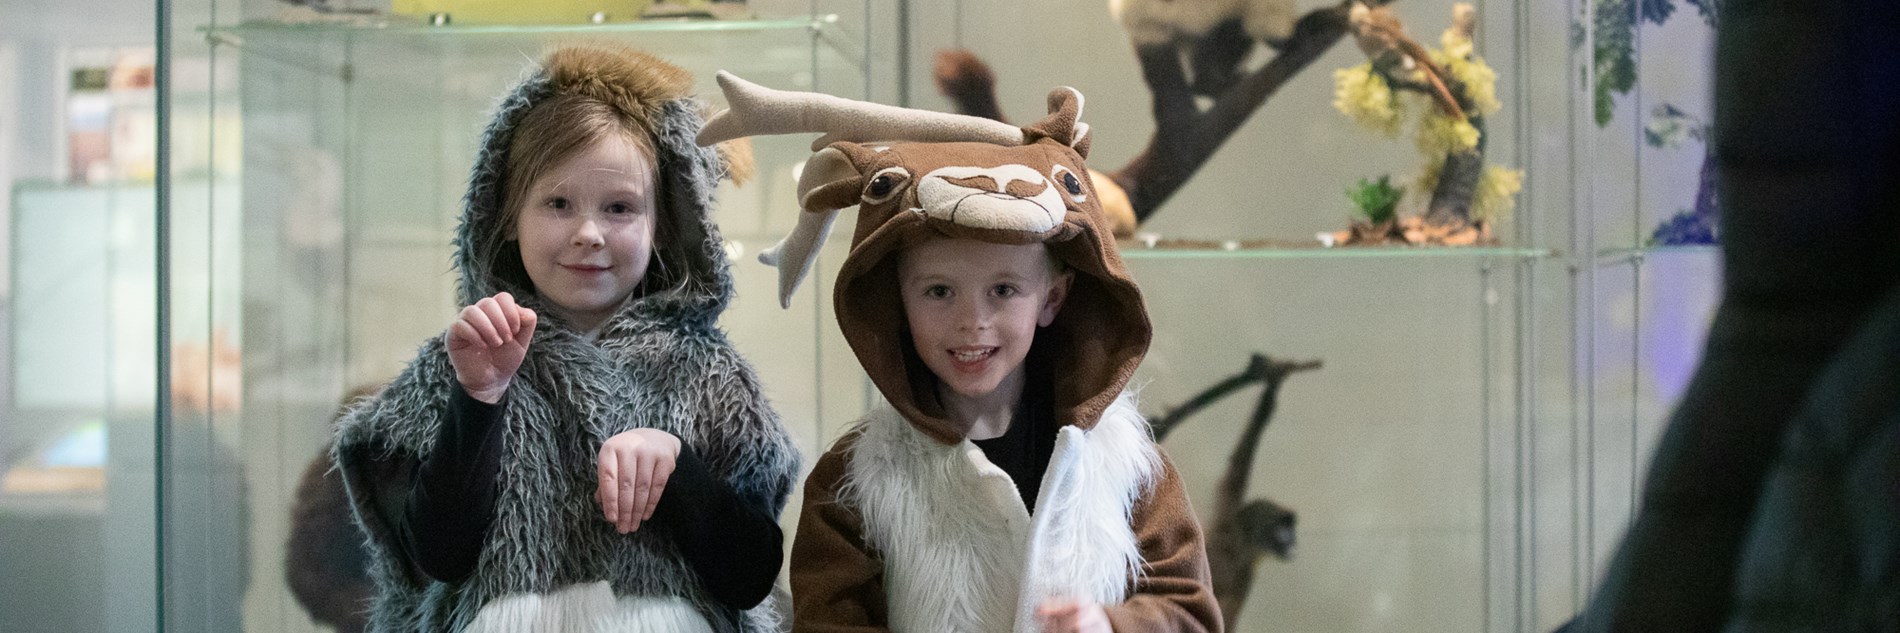 Two primary school aged children, one dressed as a deer and the other in a grey furred hooded, sleeveless outfit.